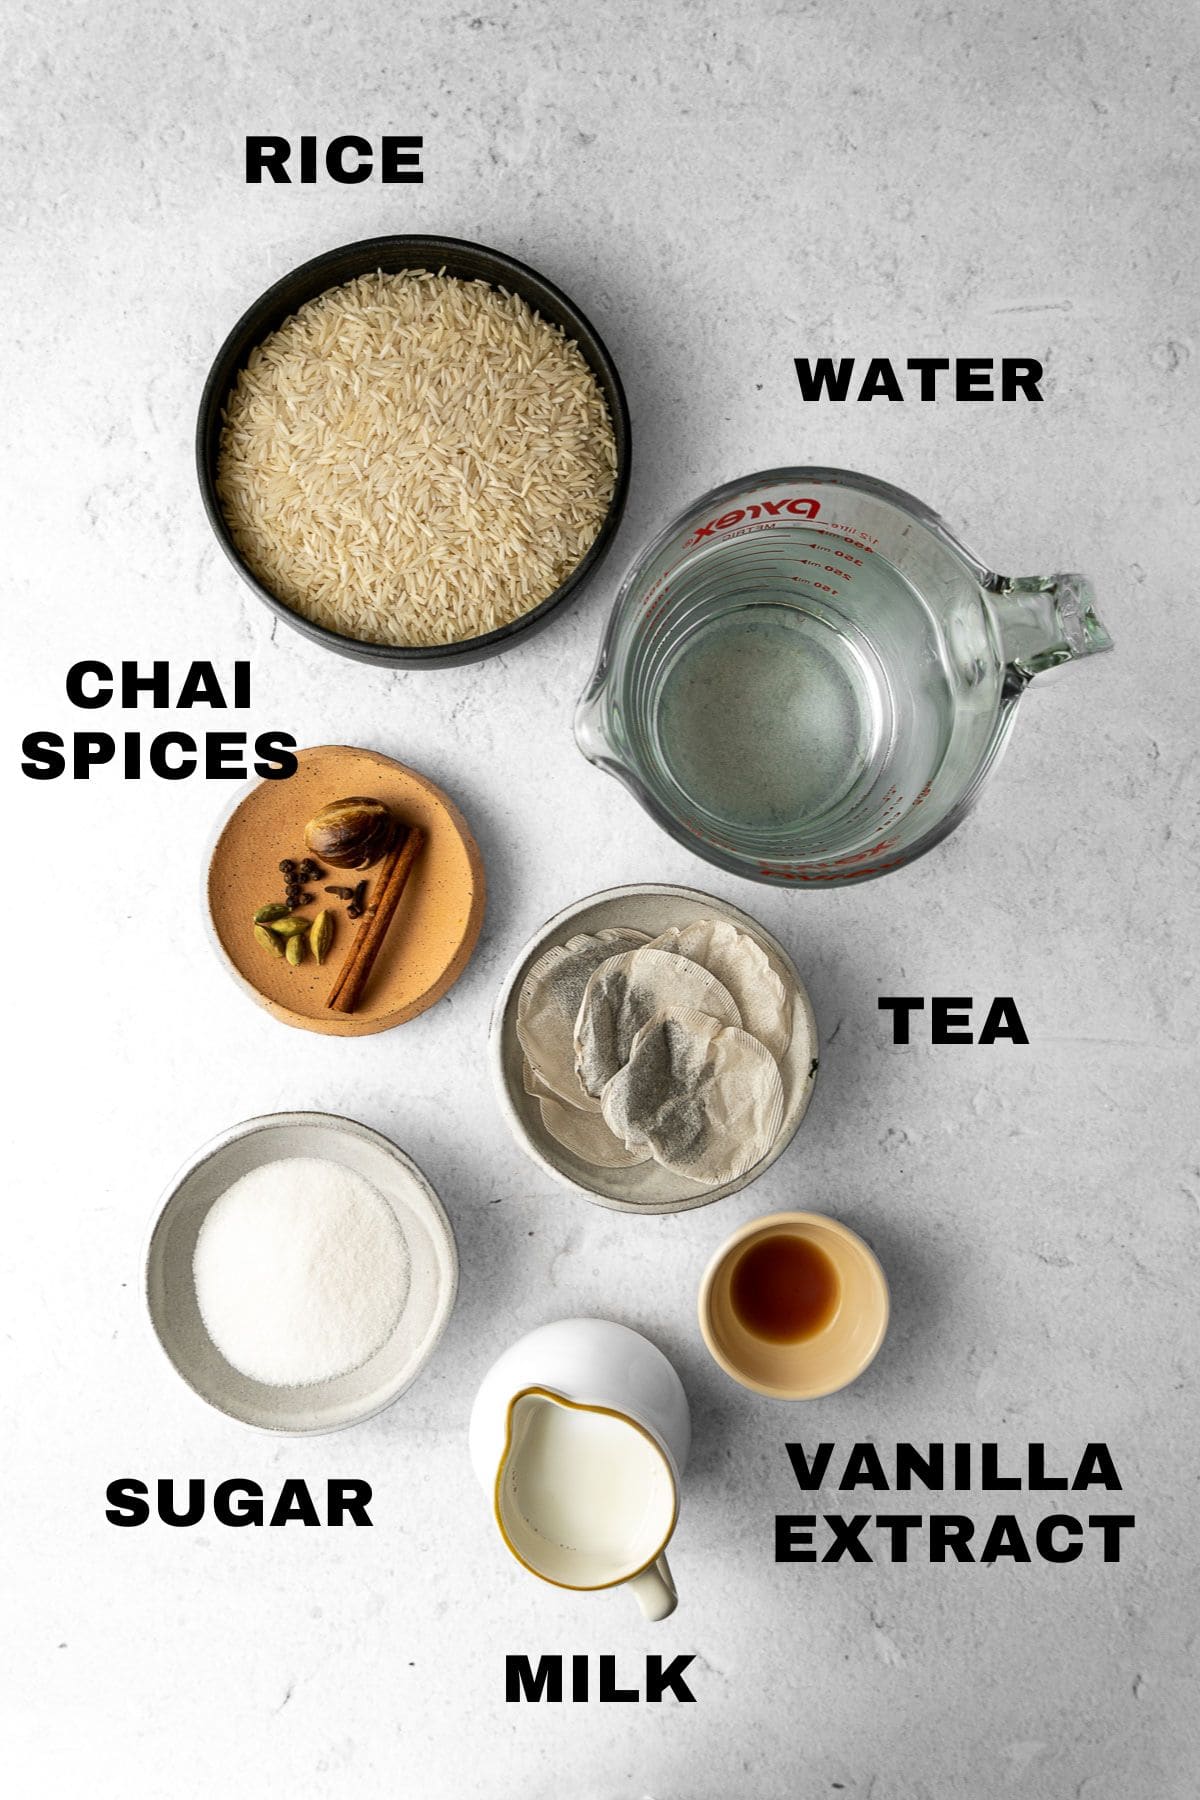 Rice, water, chai spices, tea, vanilla extract, milk, and sugar ingredients pictured with written labels.